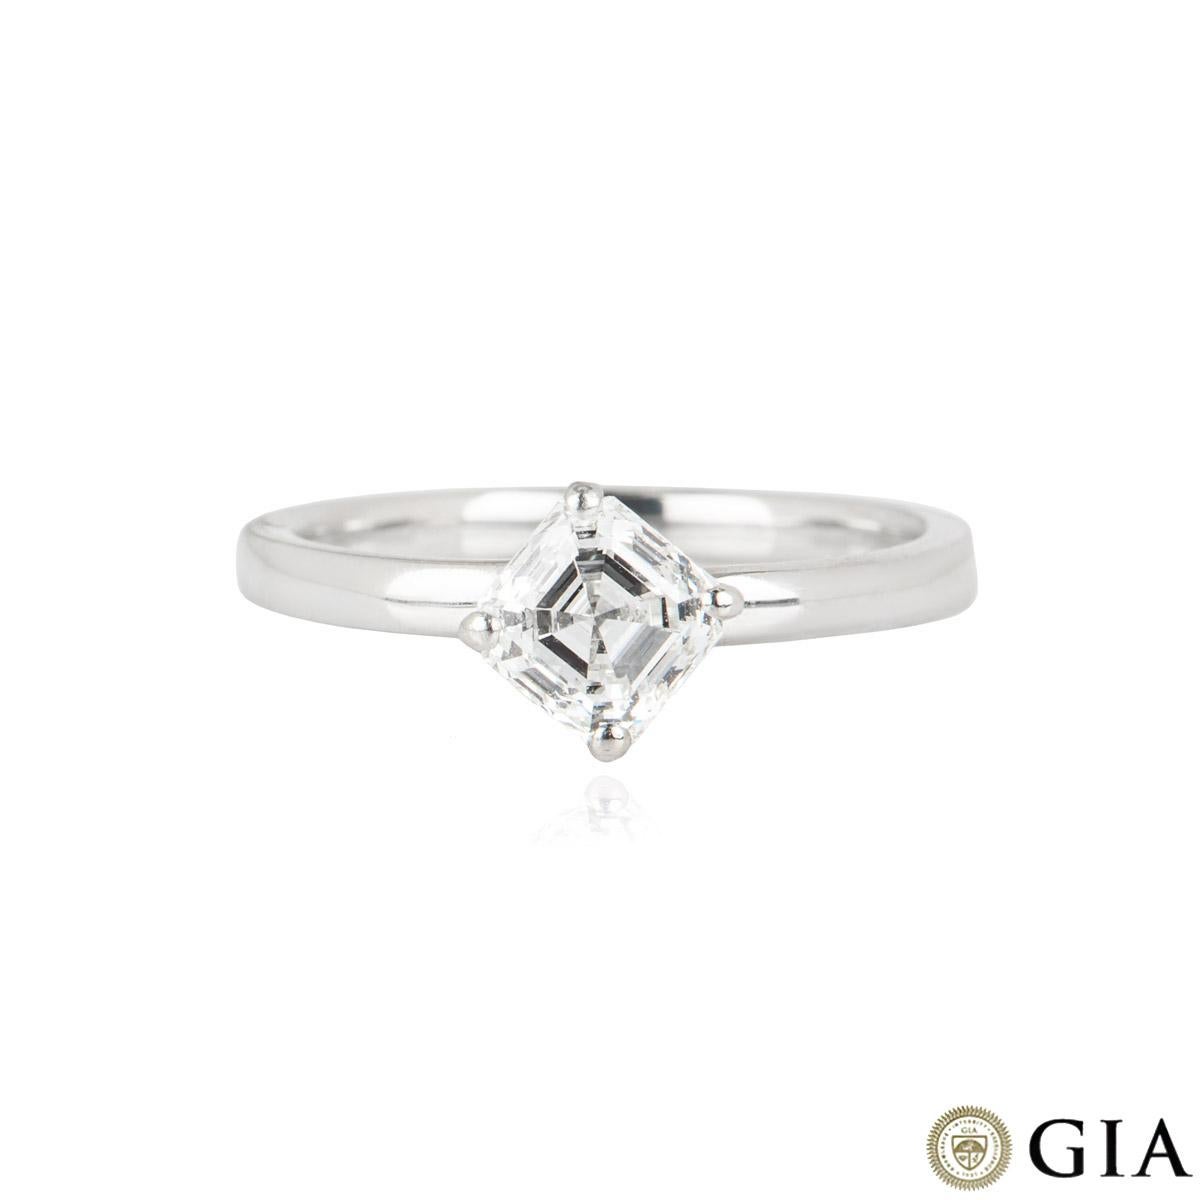 GIA Certified Asscher Cut Diamond Ring in Platinum 1.00ct G/VS2 In Excellent Condition For Sale In London, GB